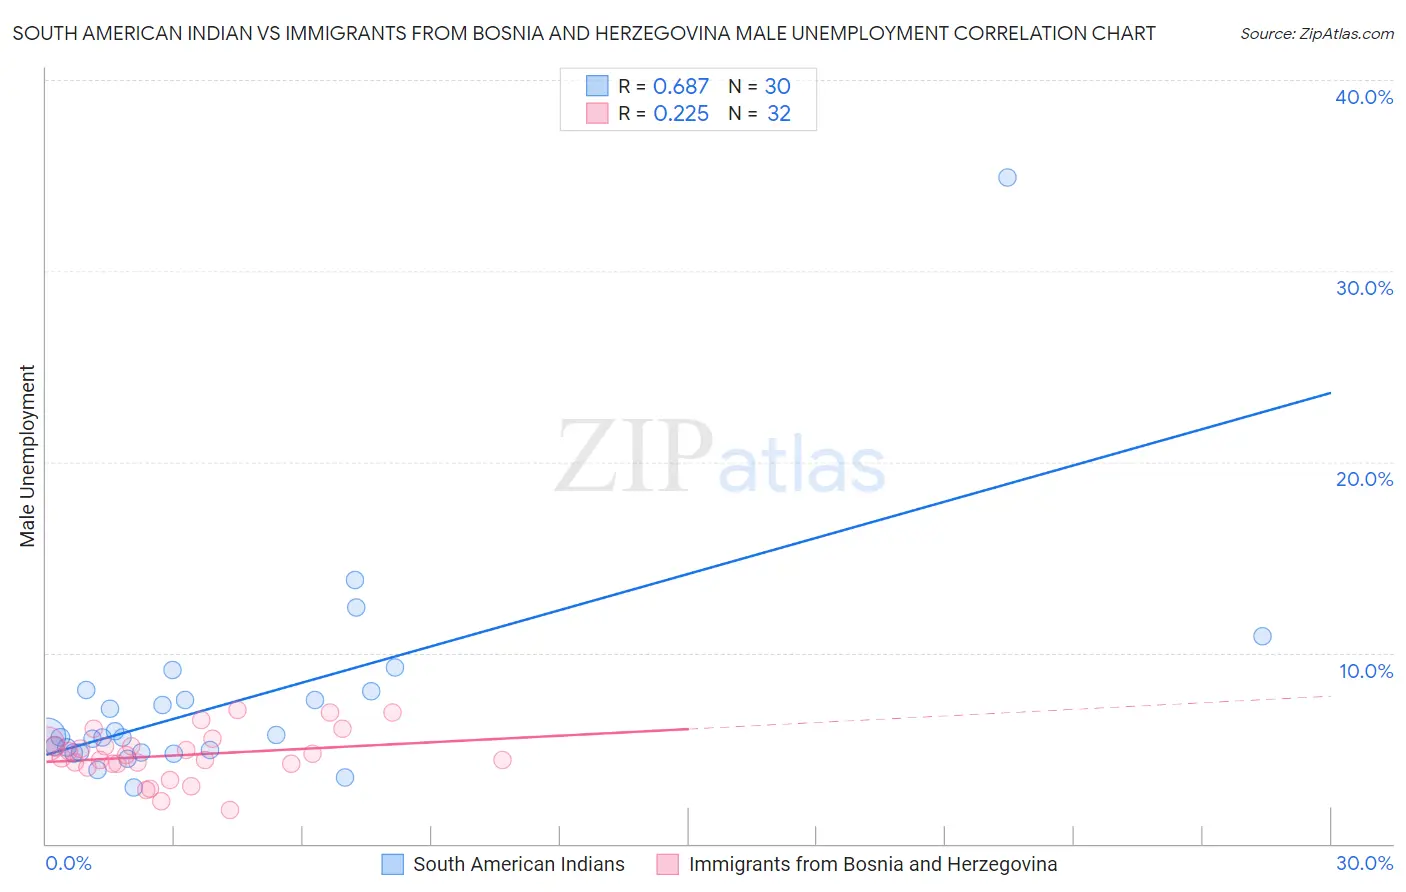 South American Indian vs Immigrants from Bosnia and Herzegovina Male Unemployment